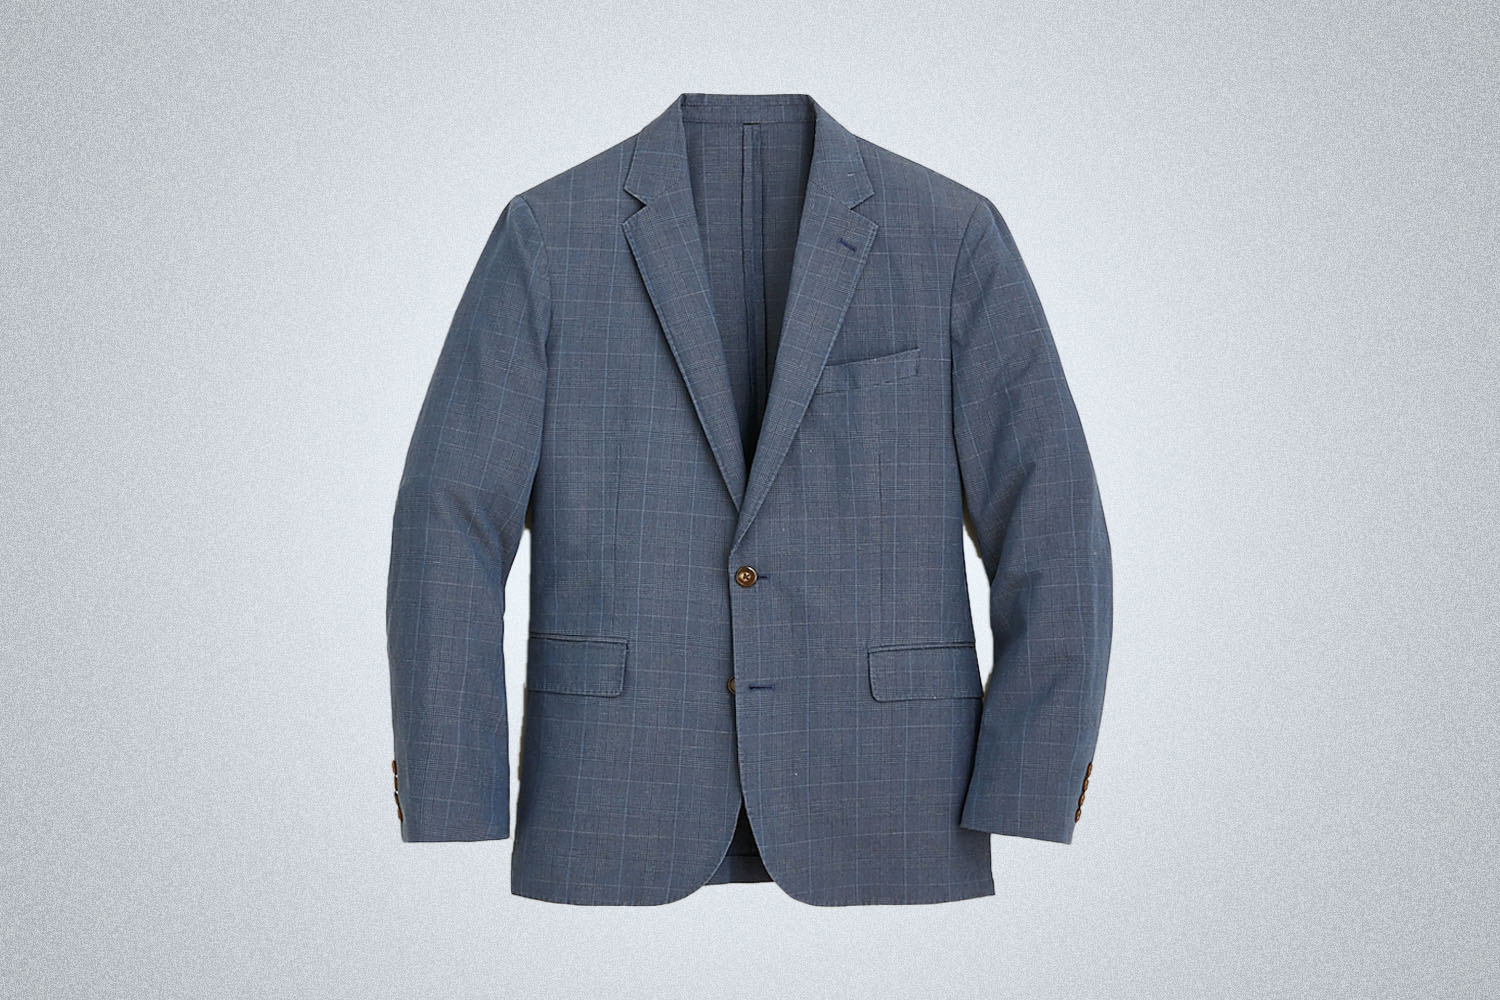 a blue suit jacket from J.Crew on a grey background